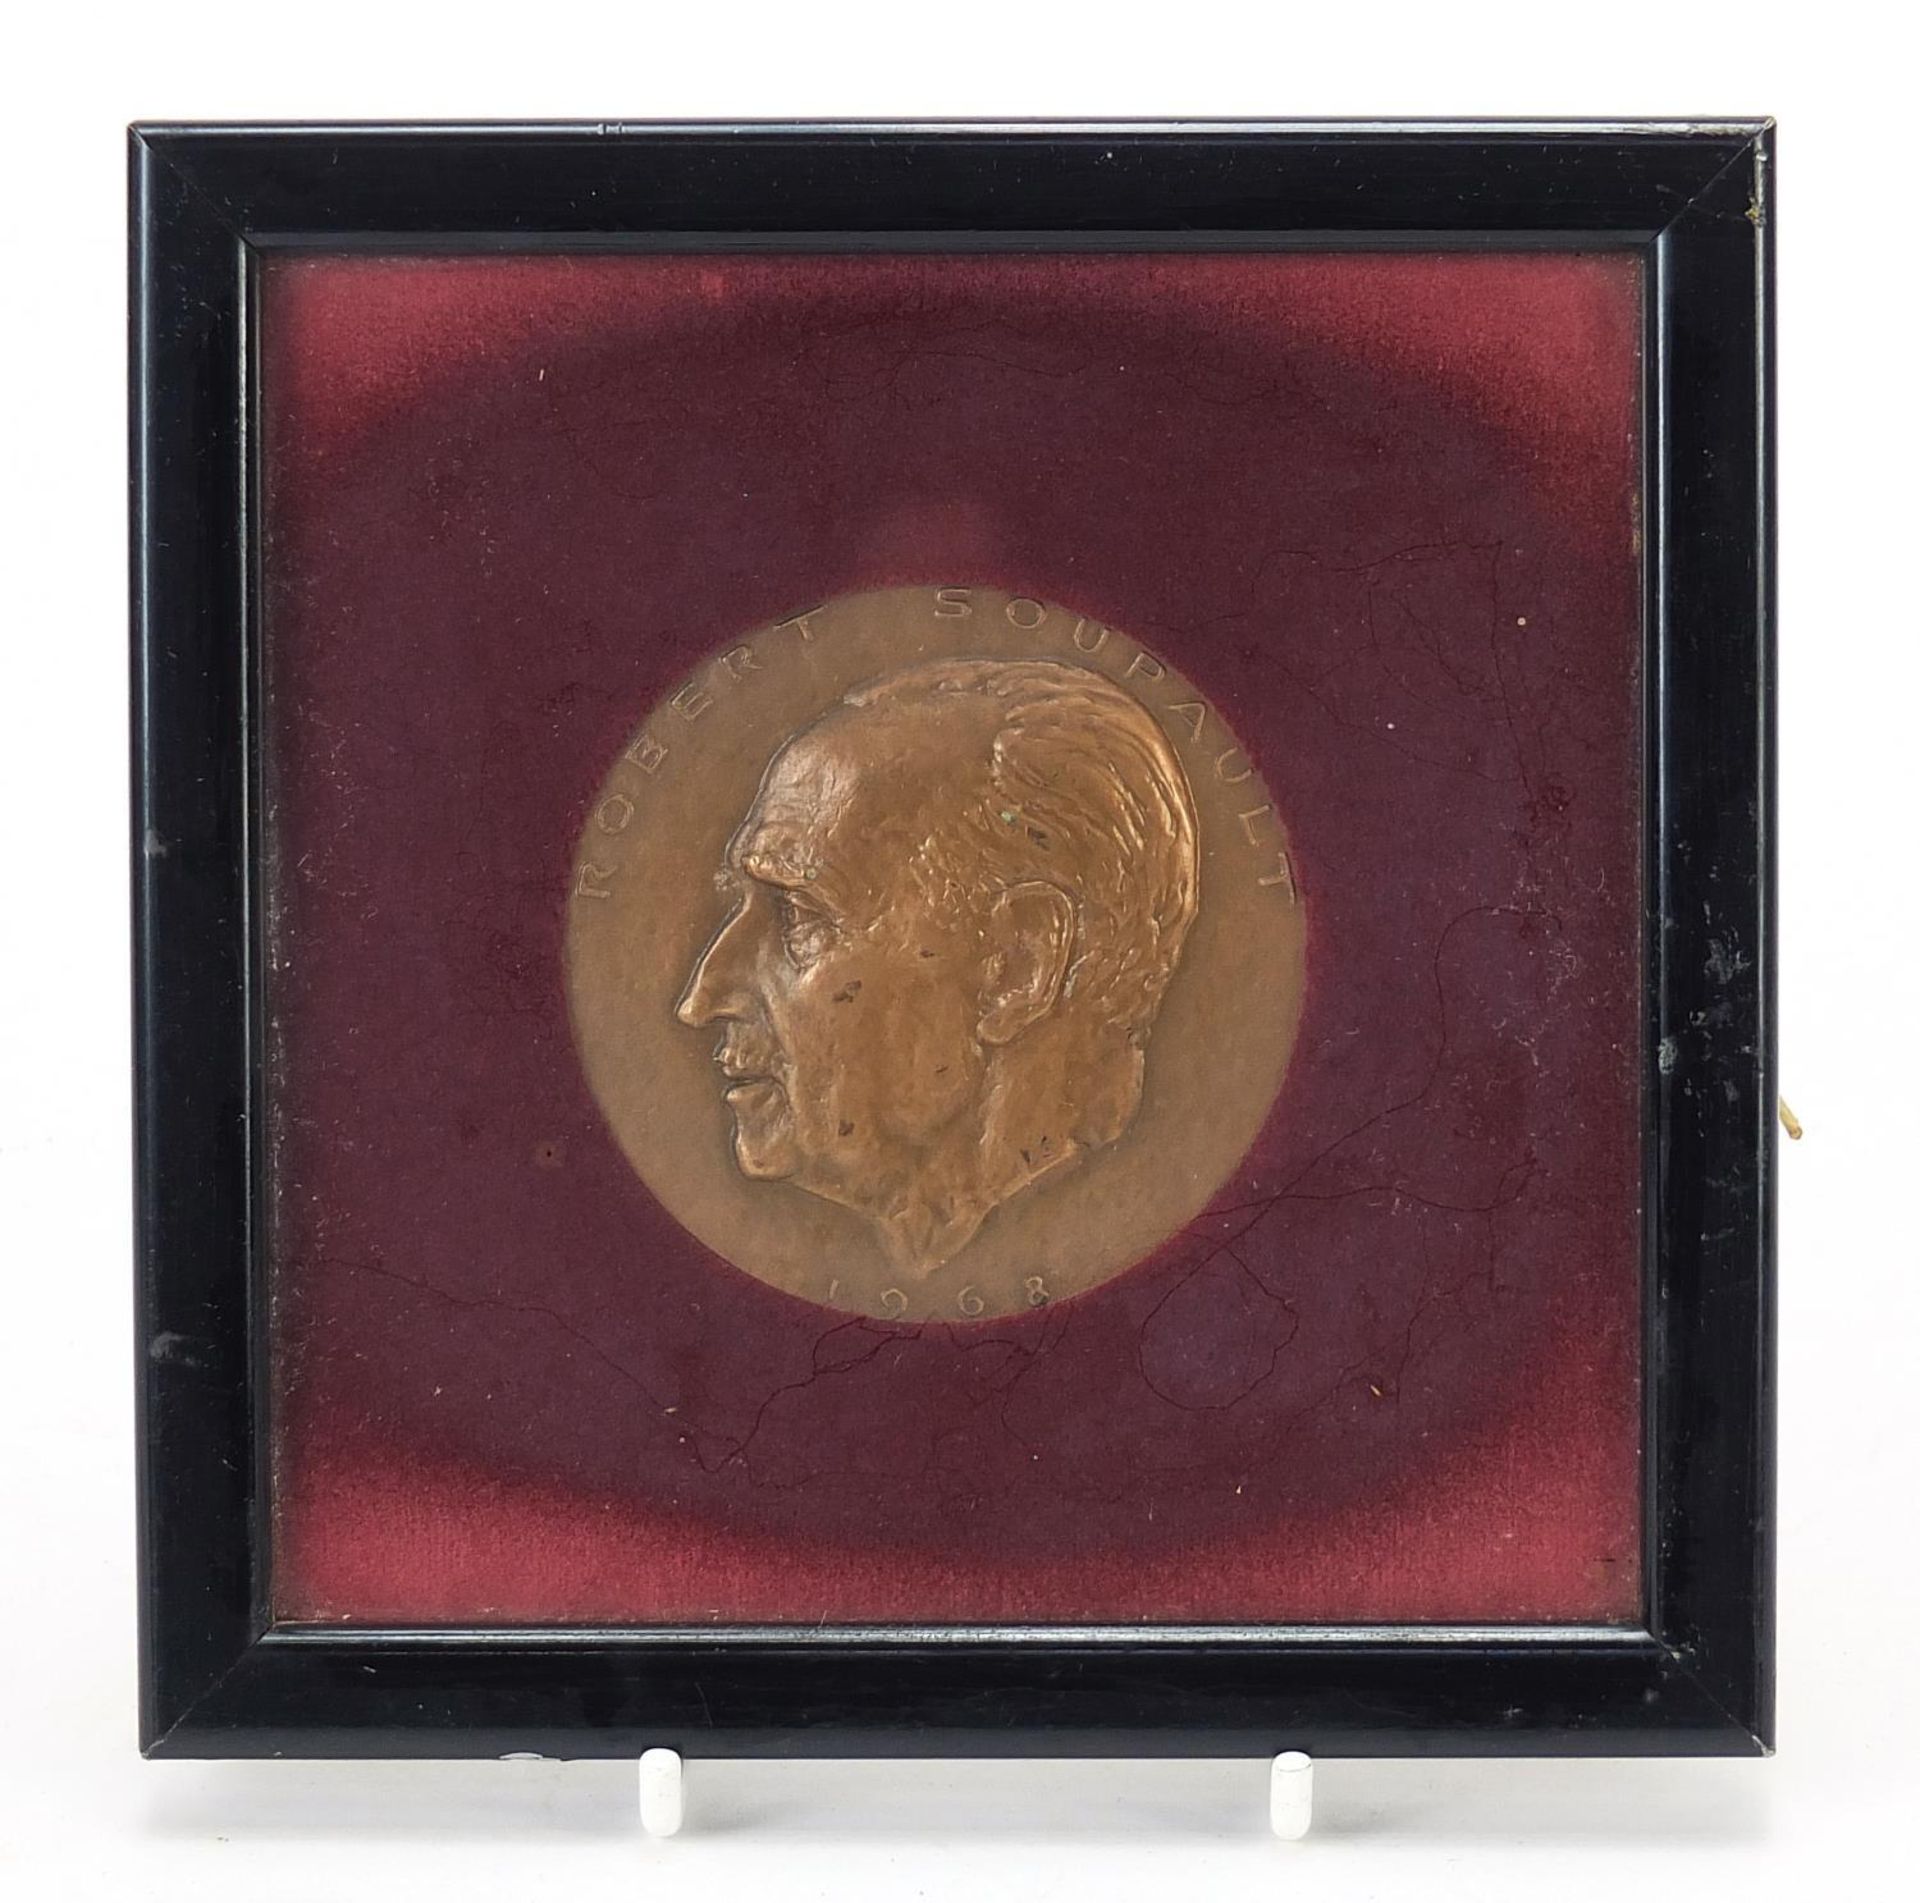 Robert Soupault commemorative bronze medallion housed in a glazed frame, dated 1968 and Antony